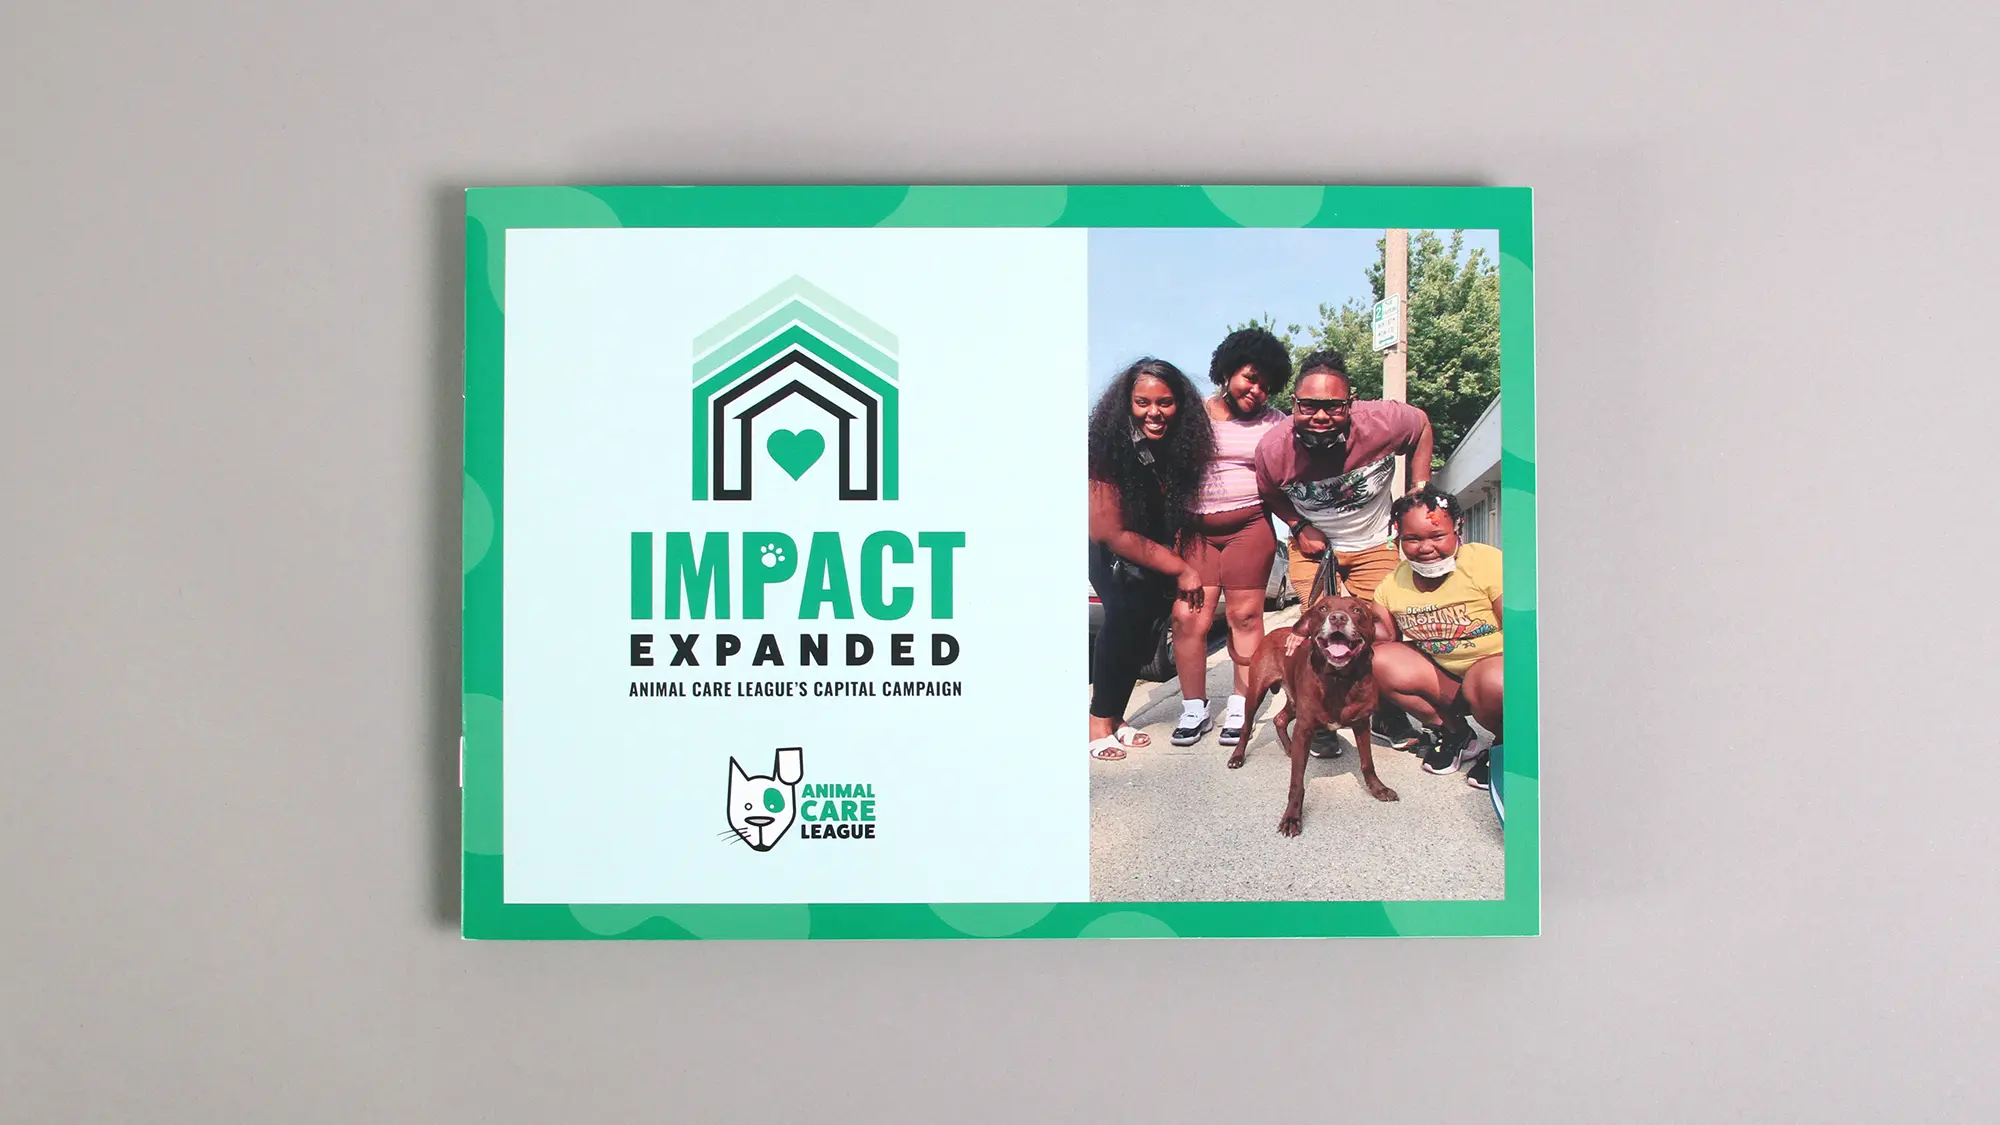 A case for support brochure cover with the headline "Impact Expanded" and the Animal Care League logo.